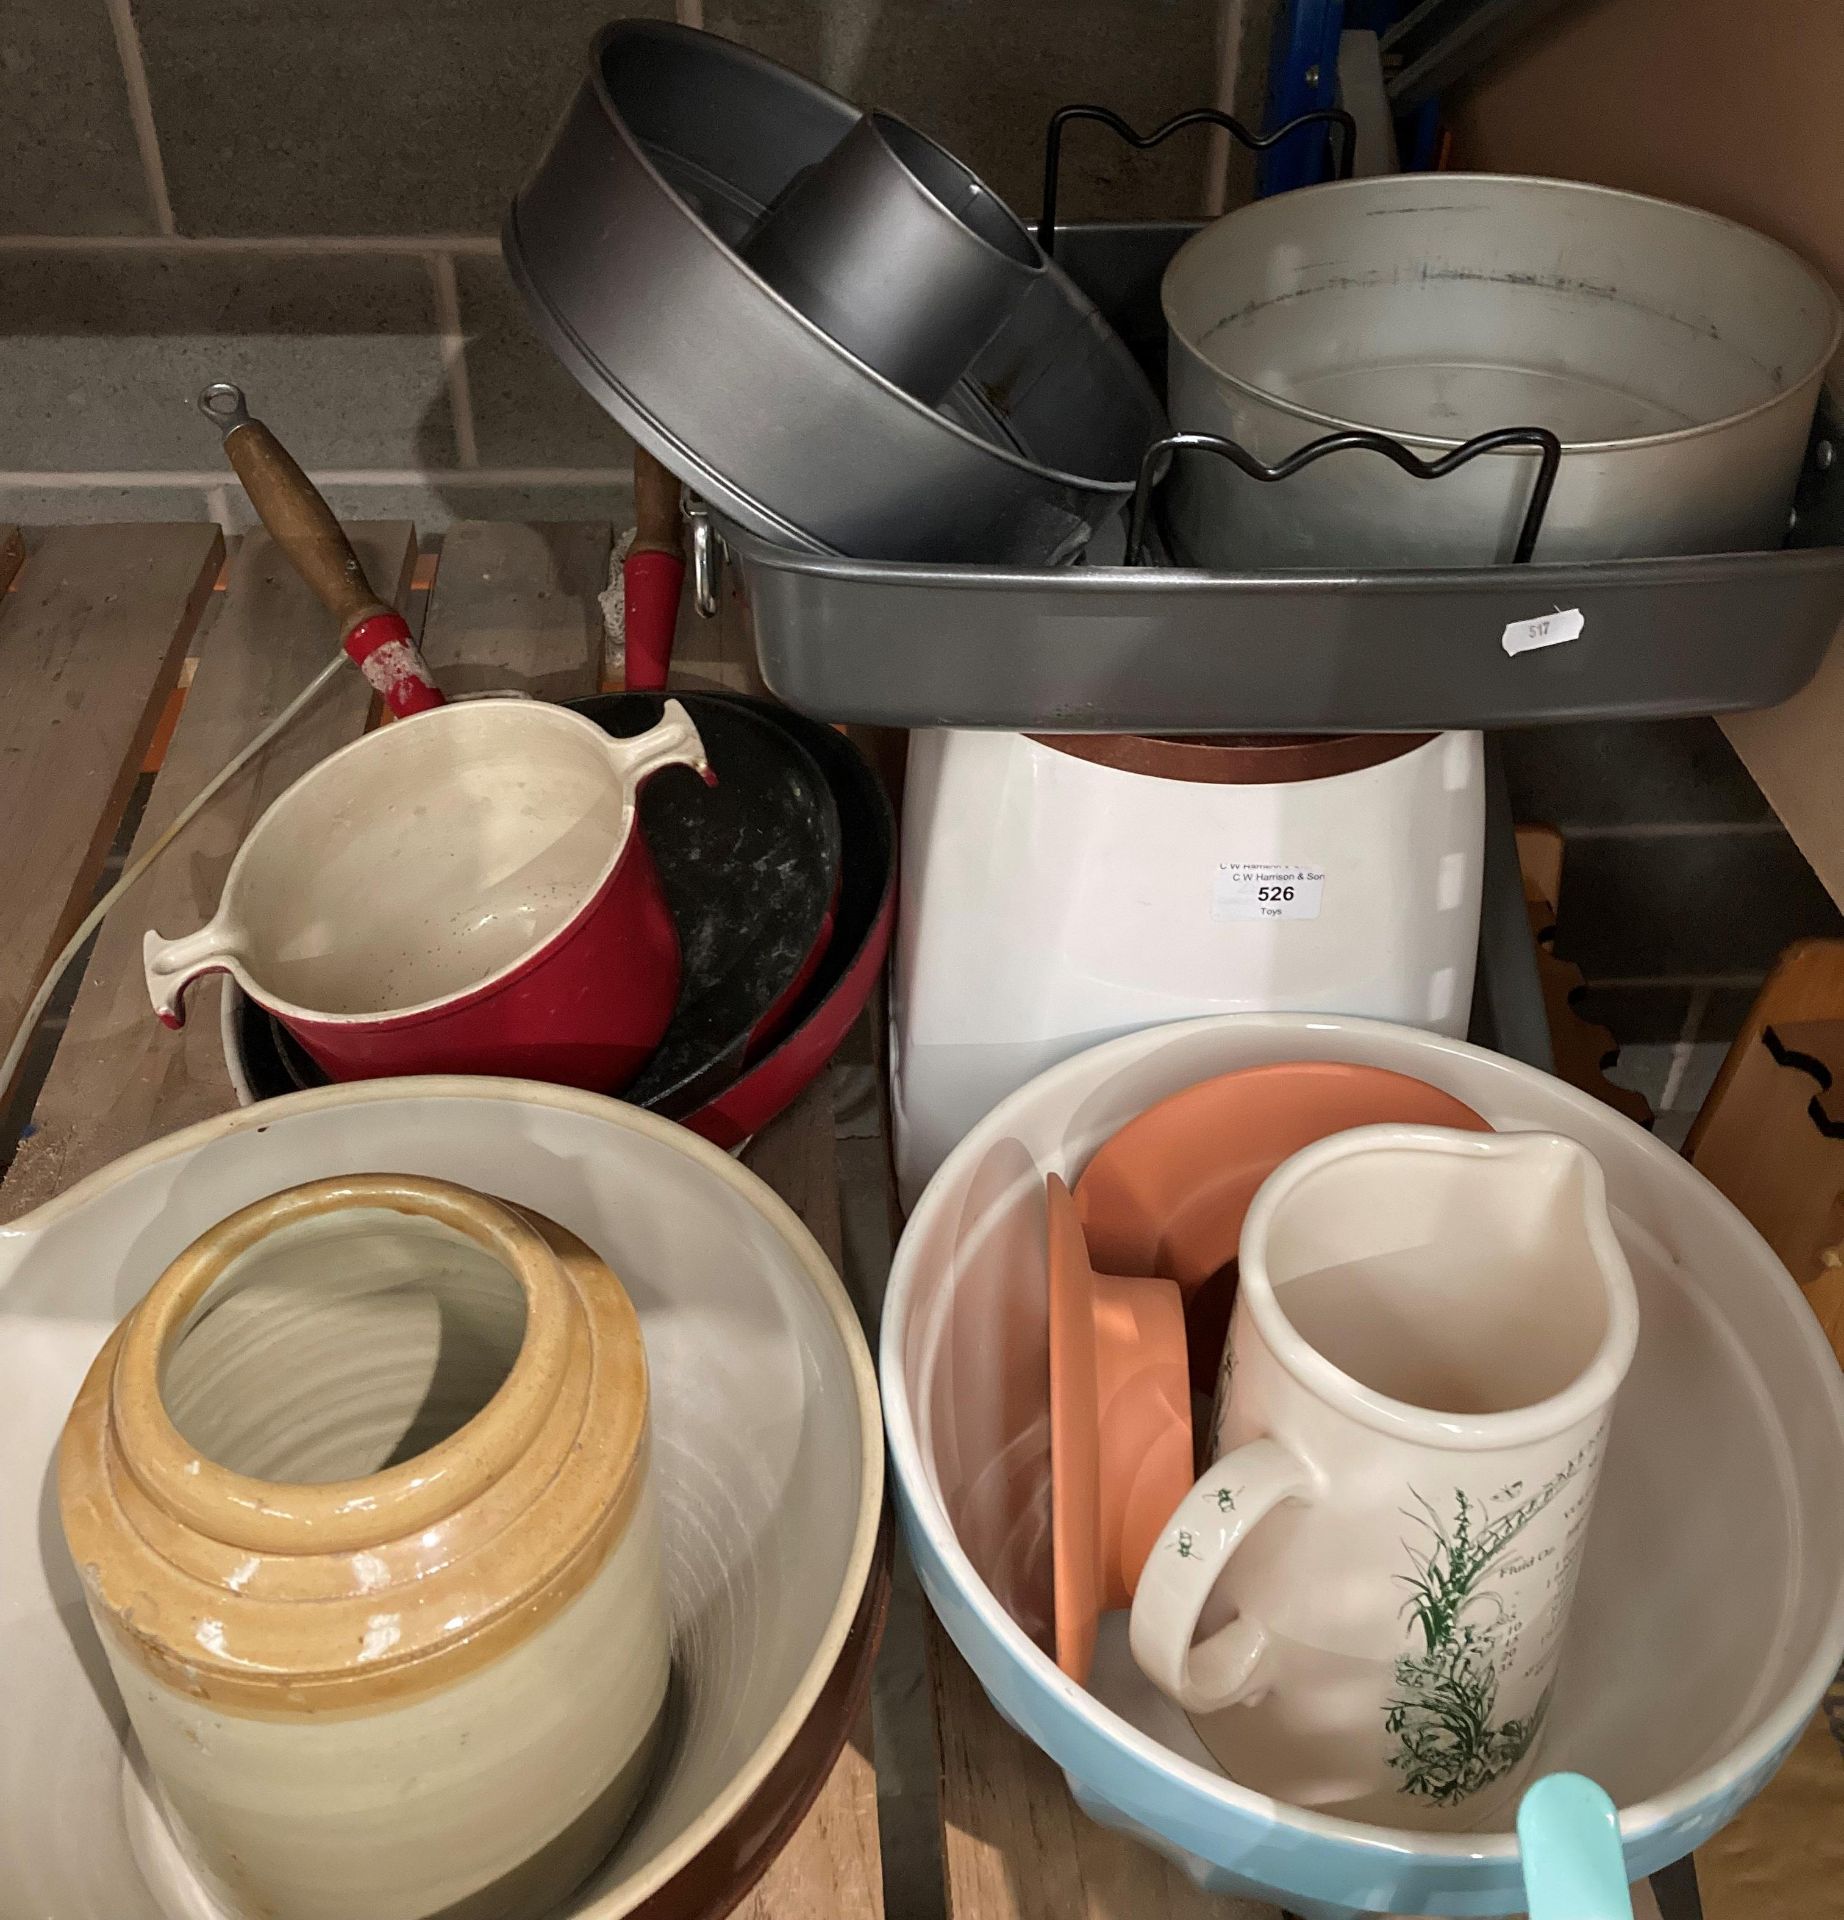 16 items kitchenware - Le Creuset 32 oval dish, Fondue dish, 2 cast iron frying pans, bread bin, - Image 2 of 3